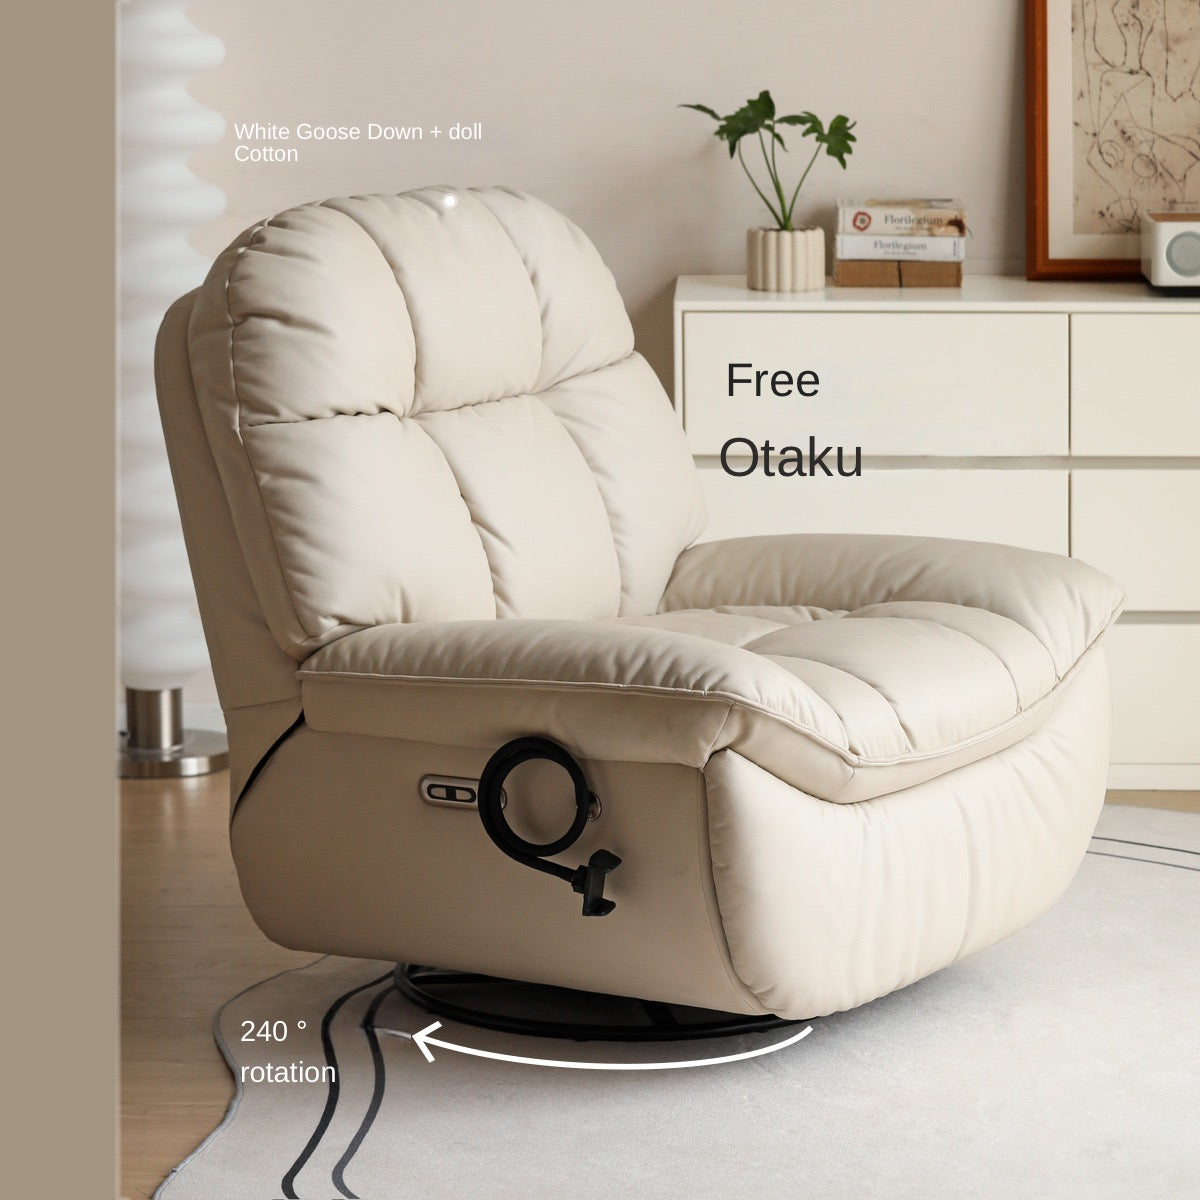 Electric 240° rotation Rocking chair"-